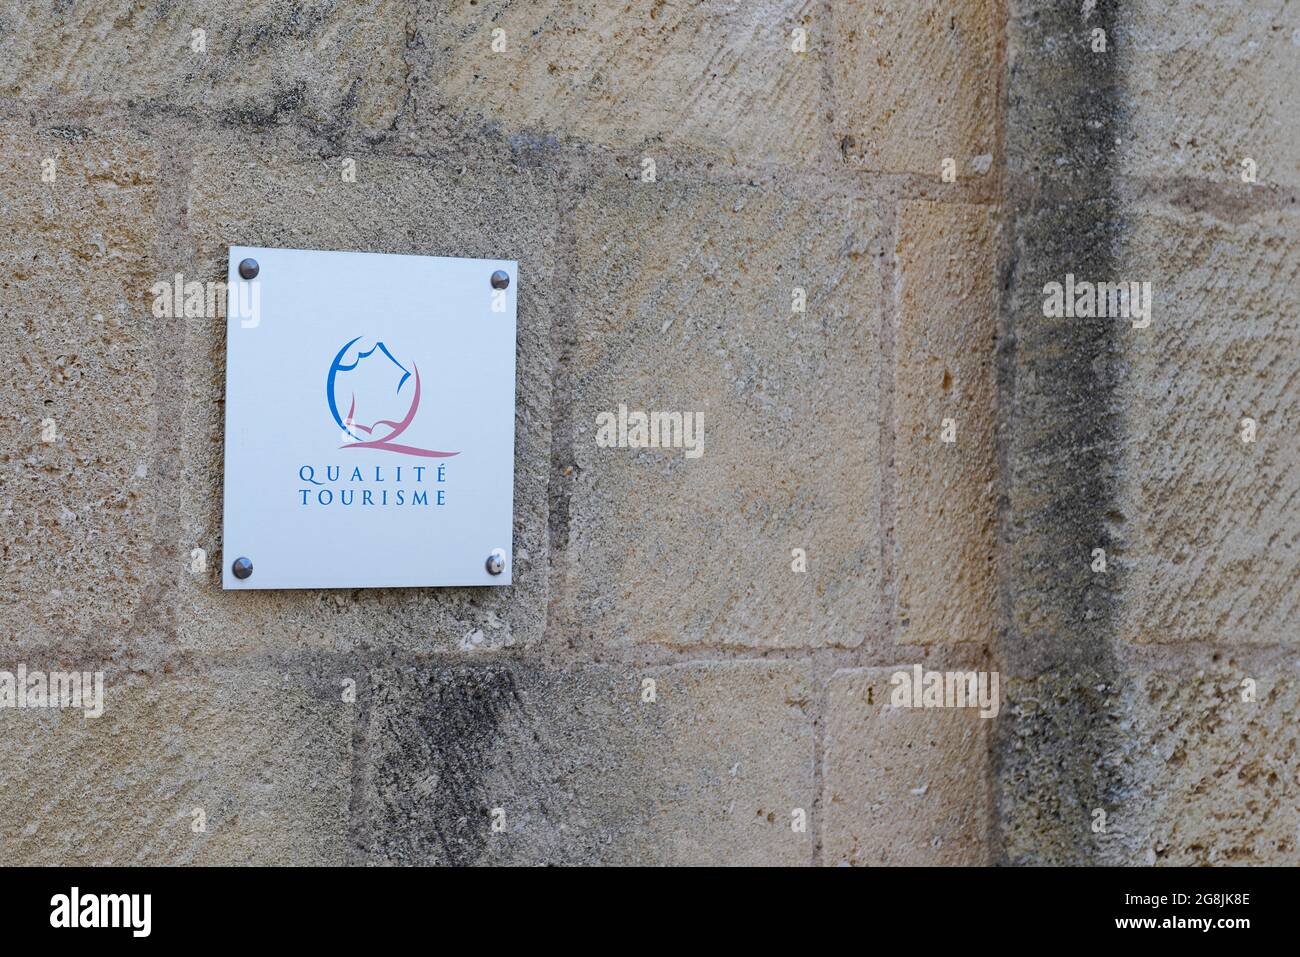 Bordeaux , Aquitaine  France - 12 28 2020 : Qualité Tourisme logo and text sign of state guaranteed for French hospitality and tourism services Stock Photo